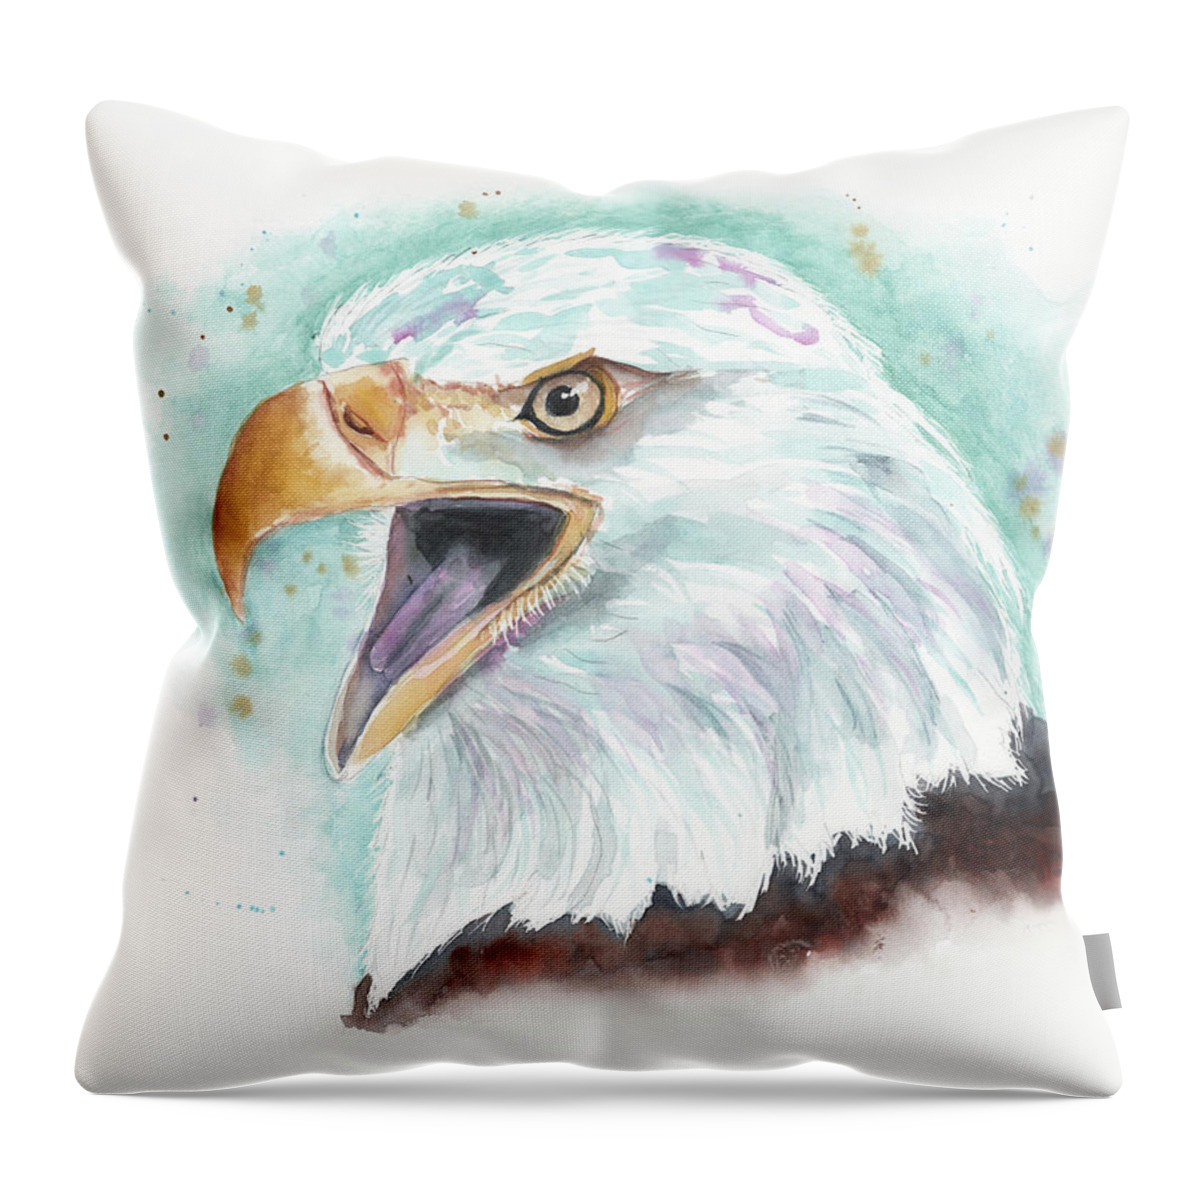 Eagle Throw Pillow featuring the painting Screamin' Eagle by Jeanette Mahoney